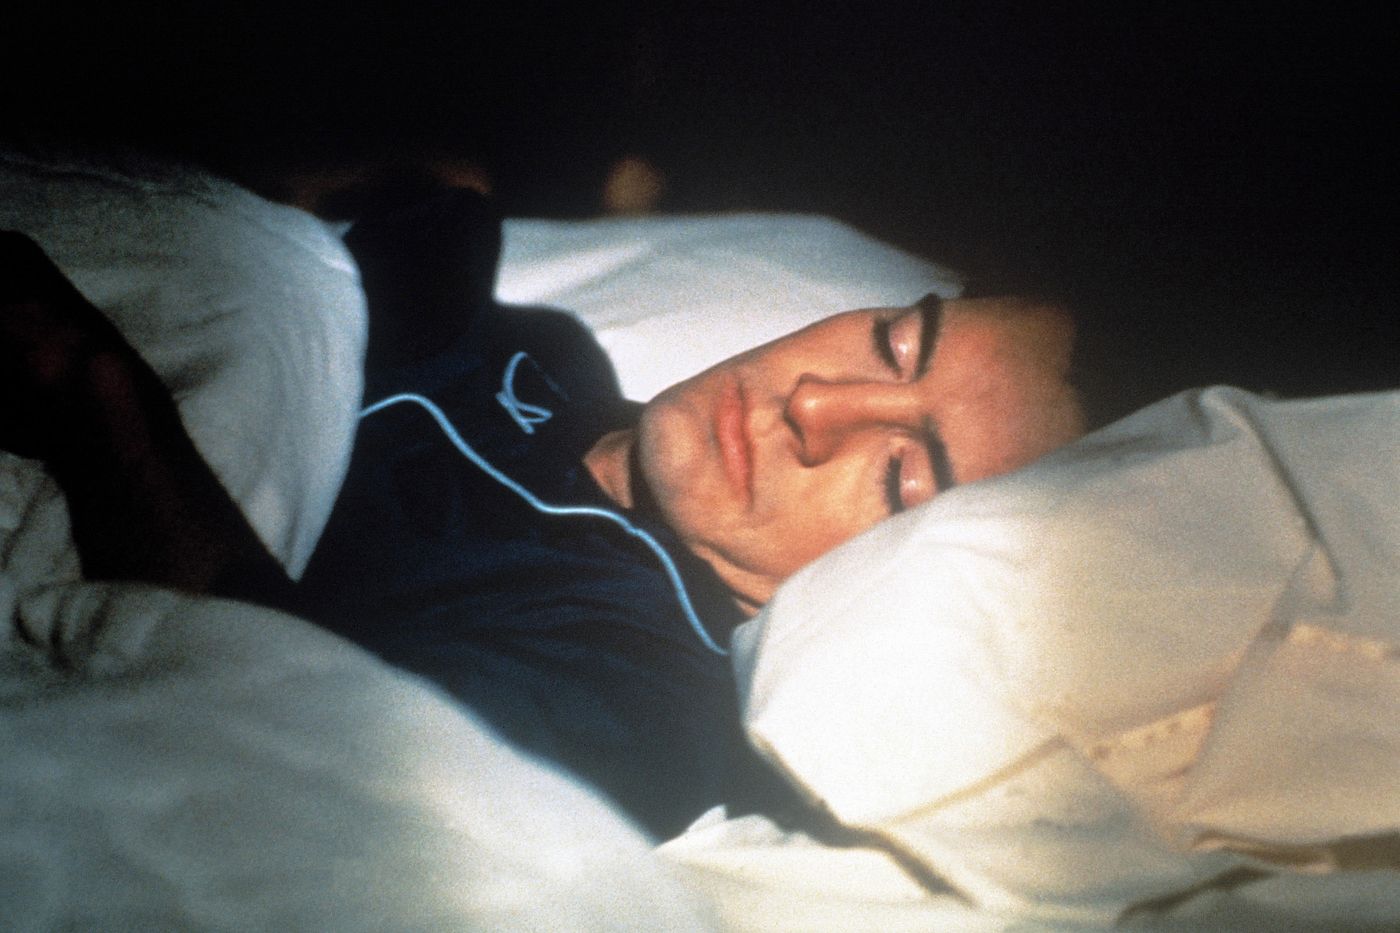 Is Falling Asleep to TV Really So Bad? An Investigation.